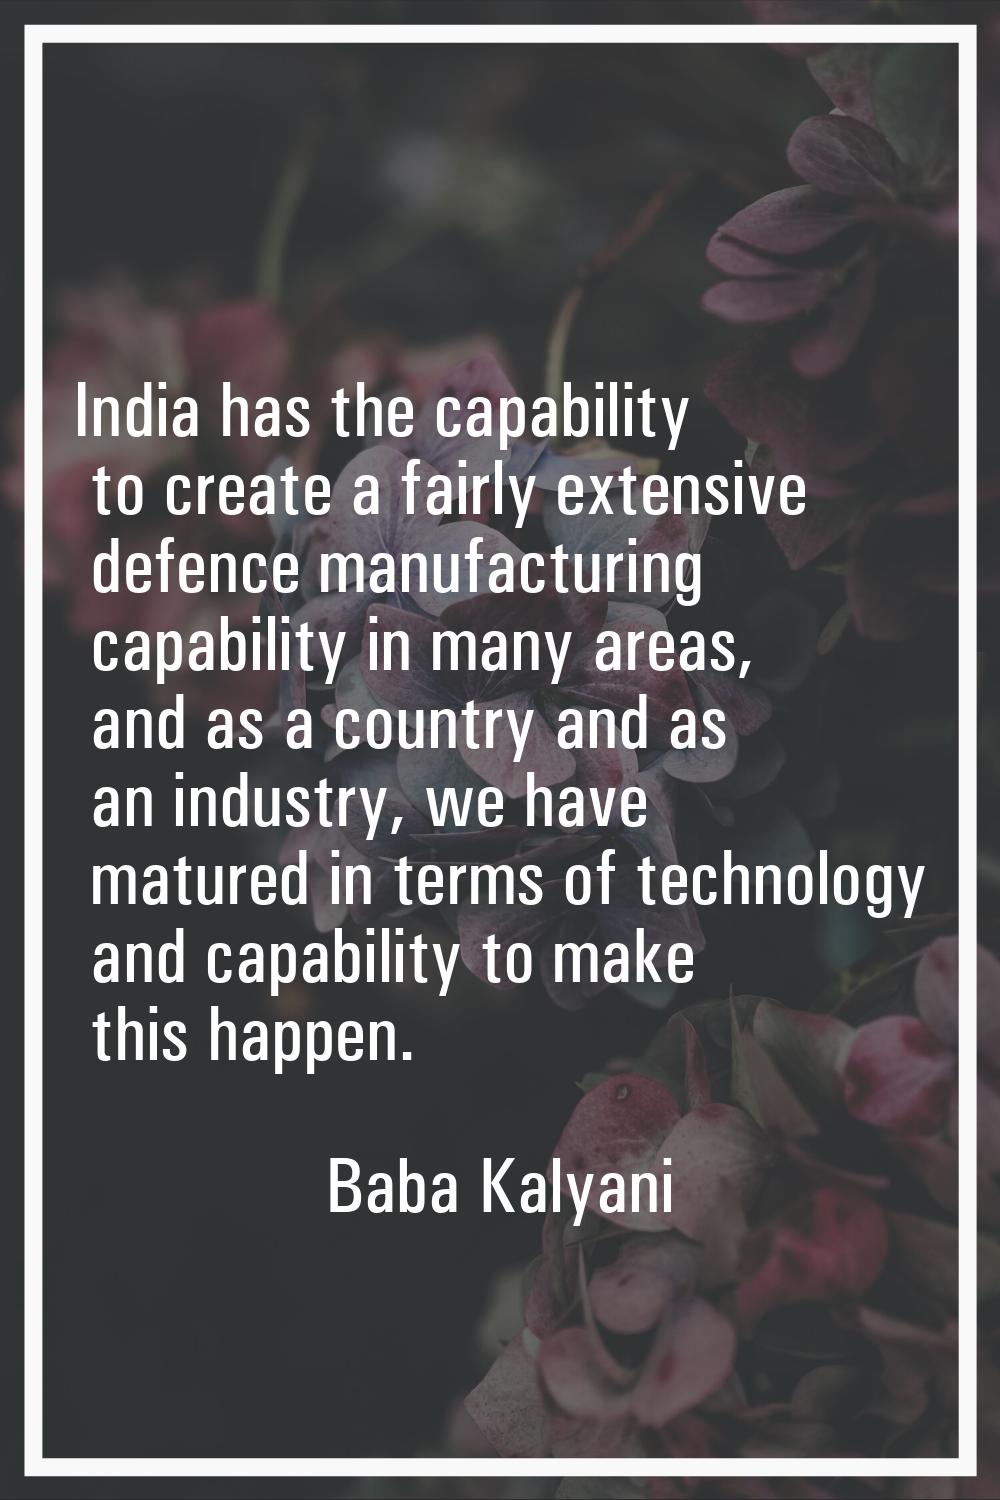 India has the capability to create a fairly extensive defence manufacturing capability in many area